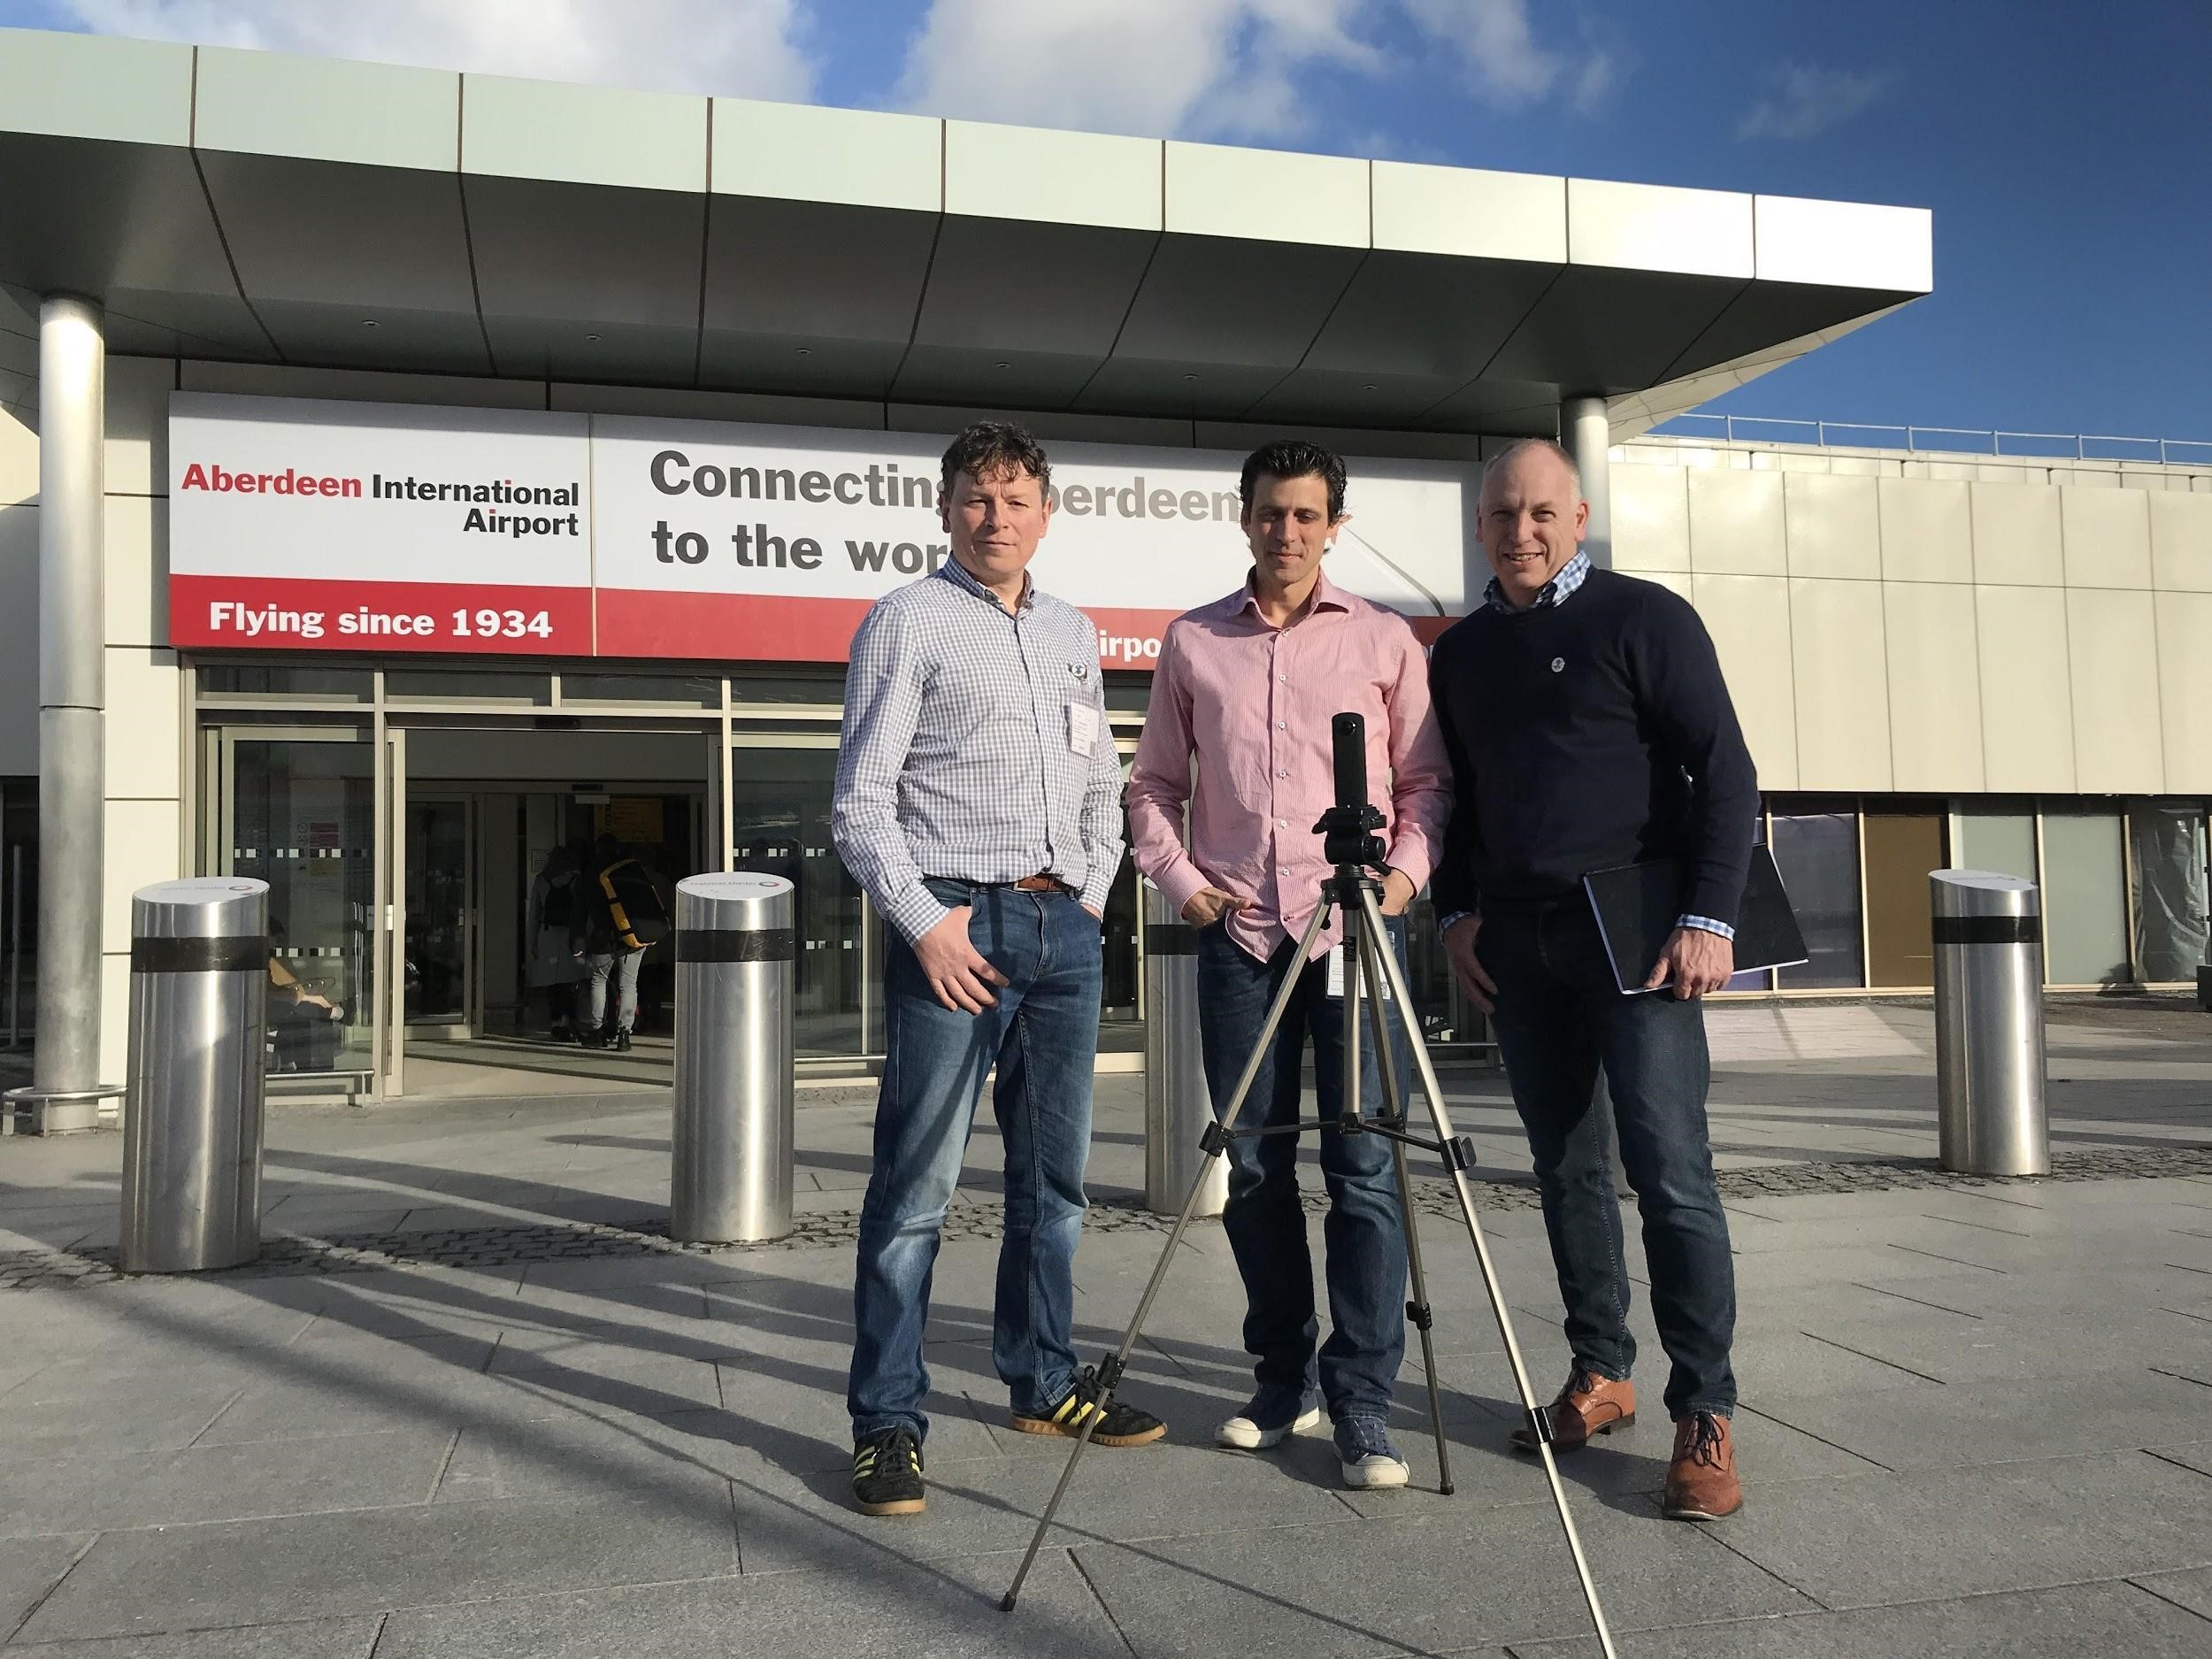 n Taylor, Director, Crag3D, Dr. Matthieu Poyade
Research Fellow and MSc Pathway Leader
School of Simulation and Visualisation,
The Glasgow School of Art and Glyn Morris from Friendly Access